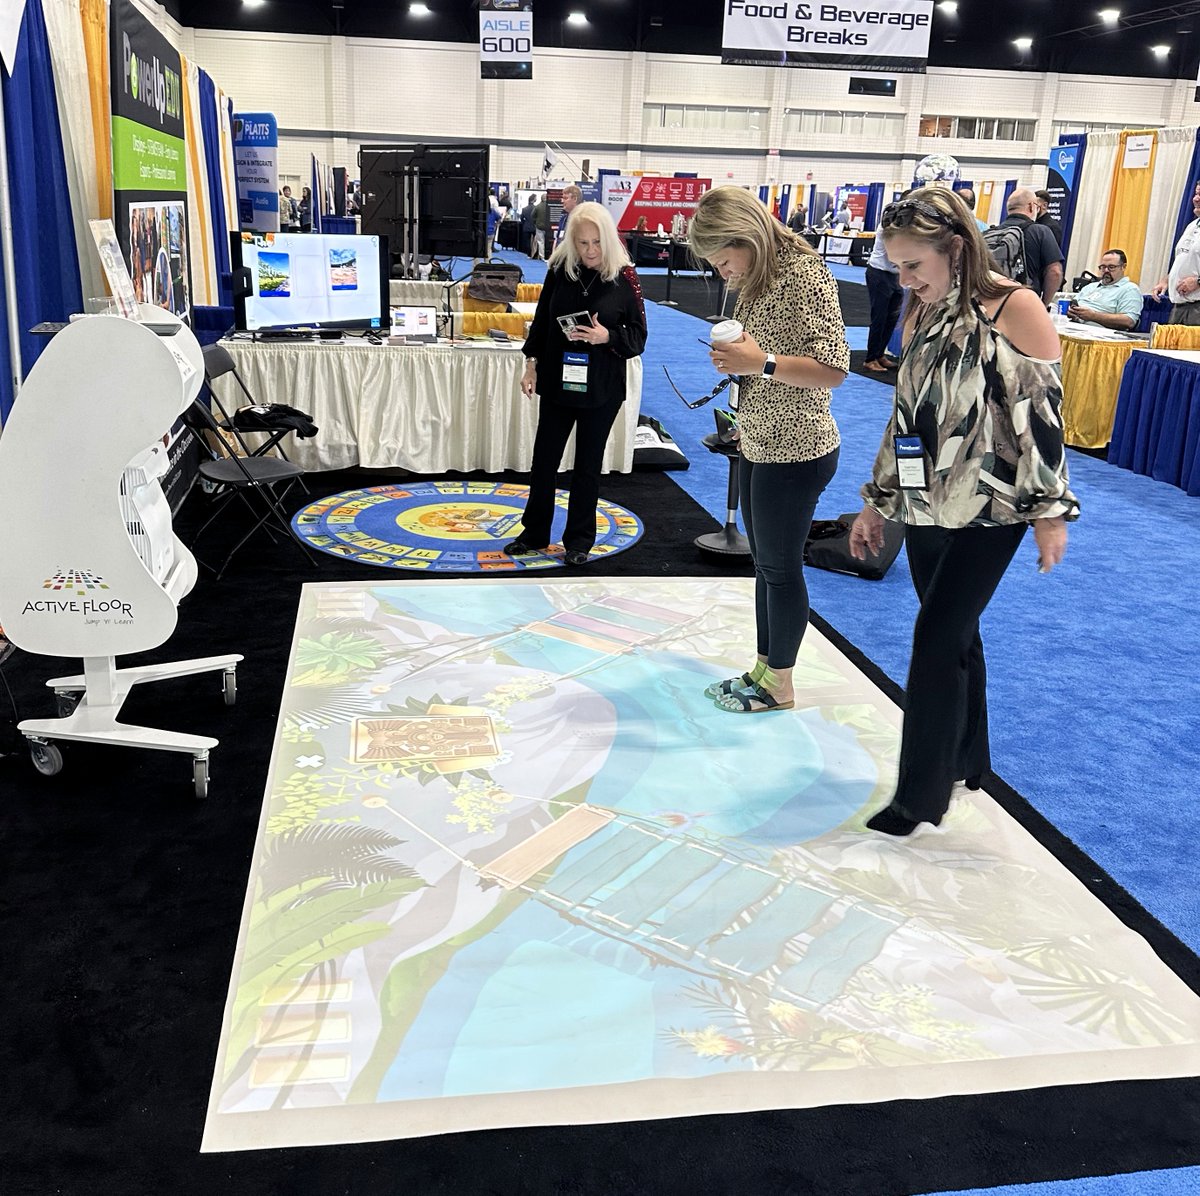 The FUN continues @scedtech 2023! Great day w/SC Educators winning $5 at @LuPlayground challenge & loving #ACTIVELearning! Still time to see all @powerupedu #classroomtech. Check out @Boxlight #3DPrinting & @WozED #STEMCareer Curriculum. See you tomorrow! Booths 645/647.